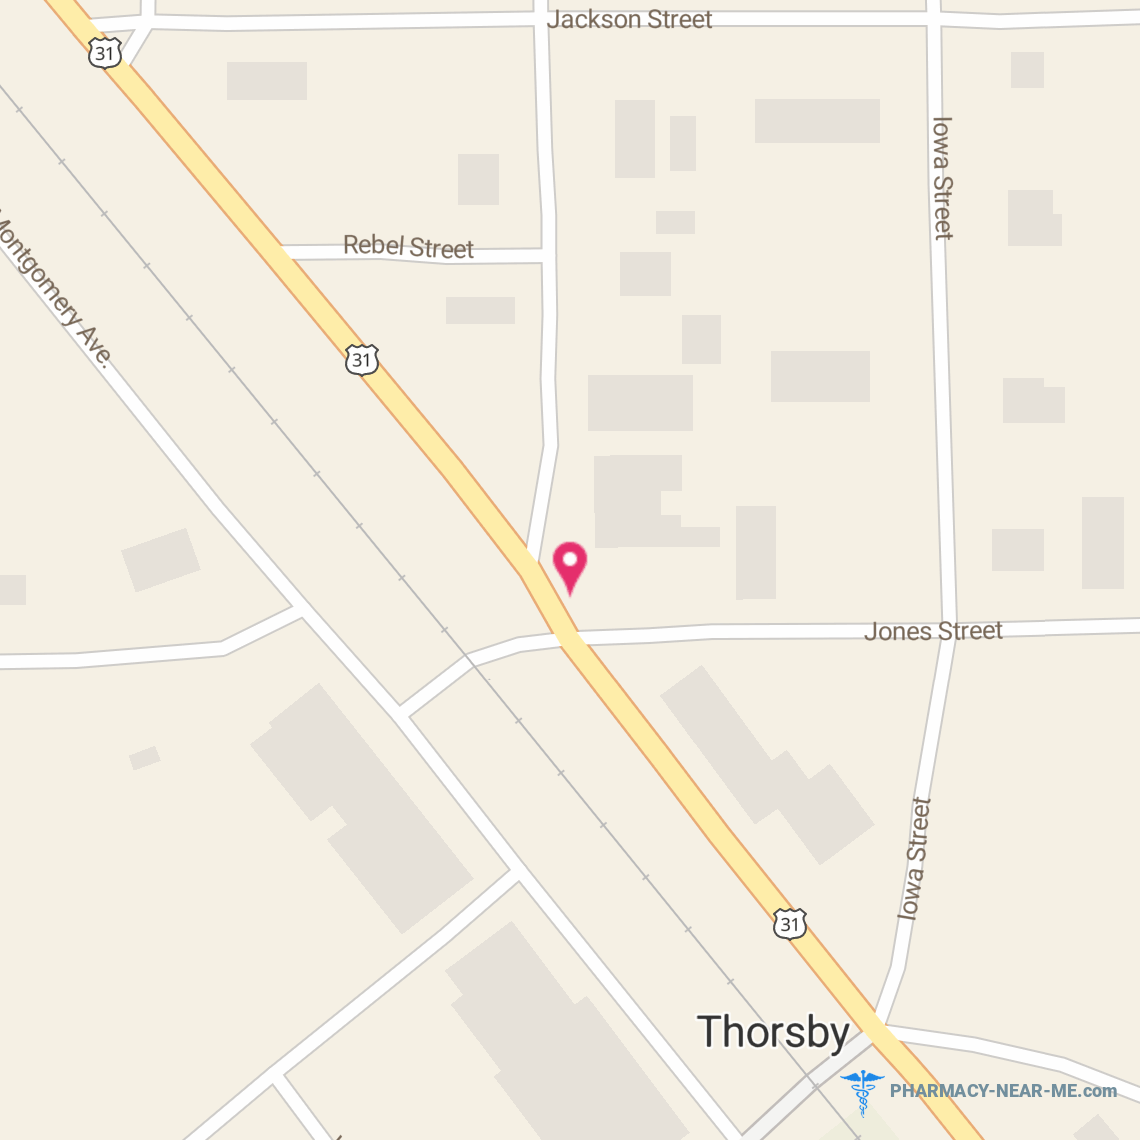 THORSBY DRUGS, INC. - Pharmacy Hours, Phone, Reviews & Information: 4 Minnesota Avenue, Thorsby, Alabama 35171, United States